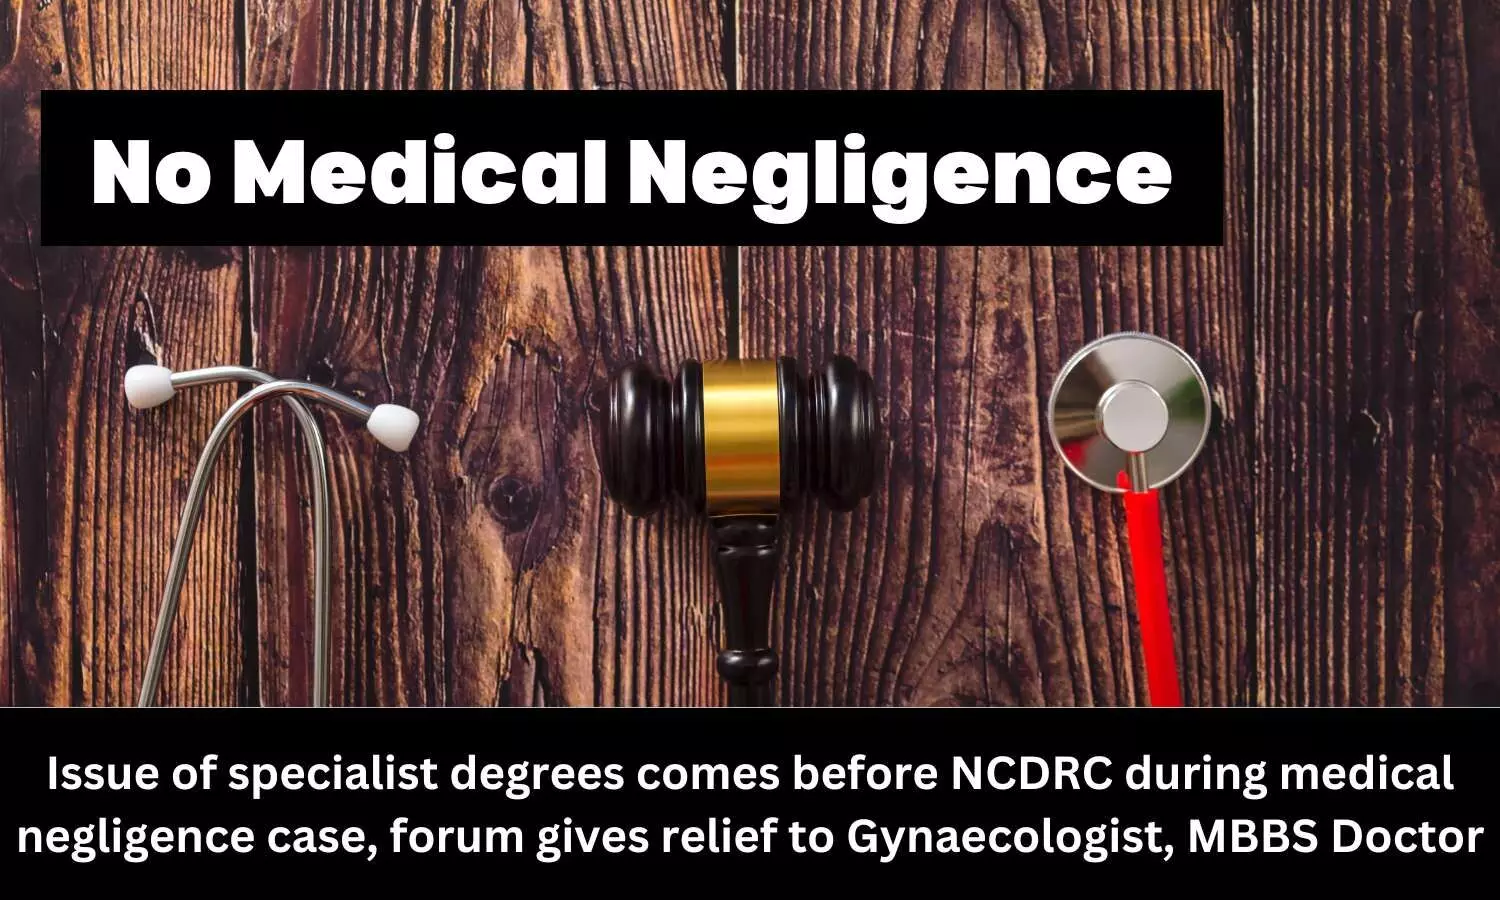 Issue of specialist degrees comes before NCDRC during medical negligence case, forum gives relief to Gynaecologist, MBBS Doctor